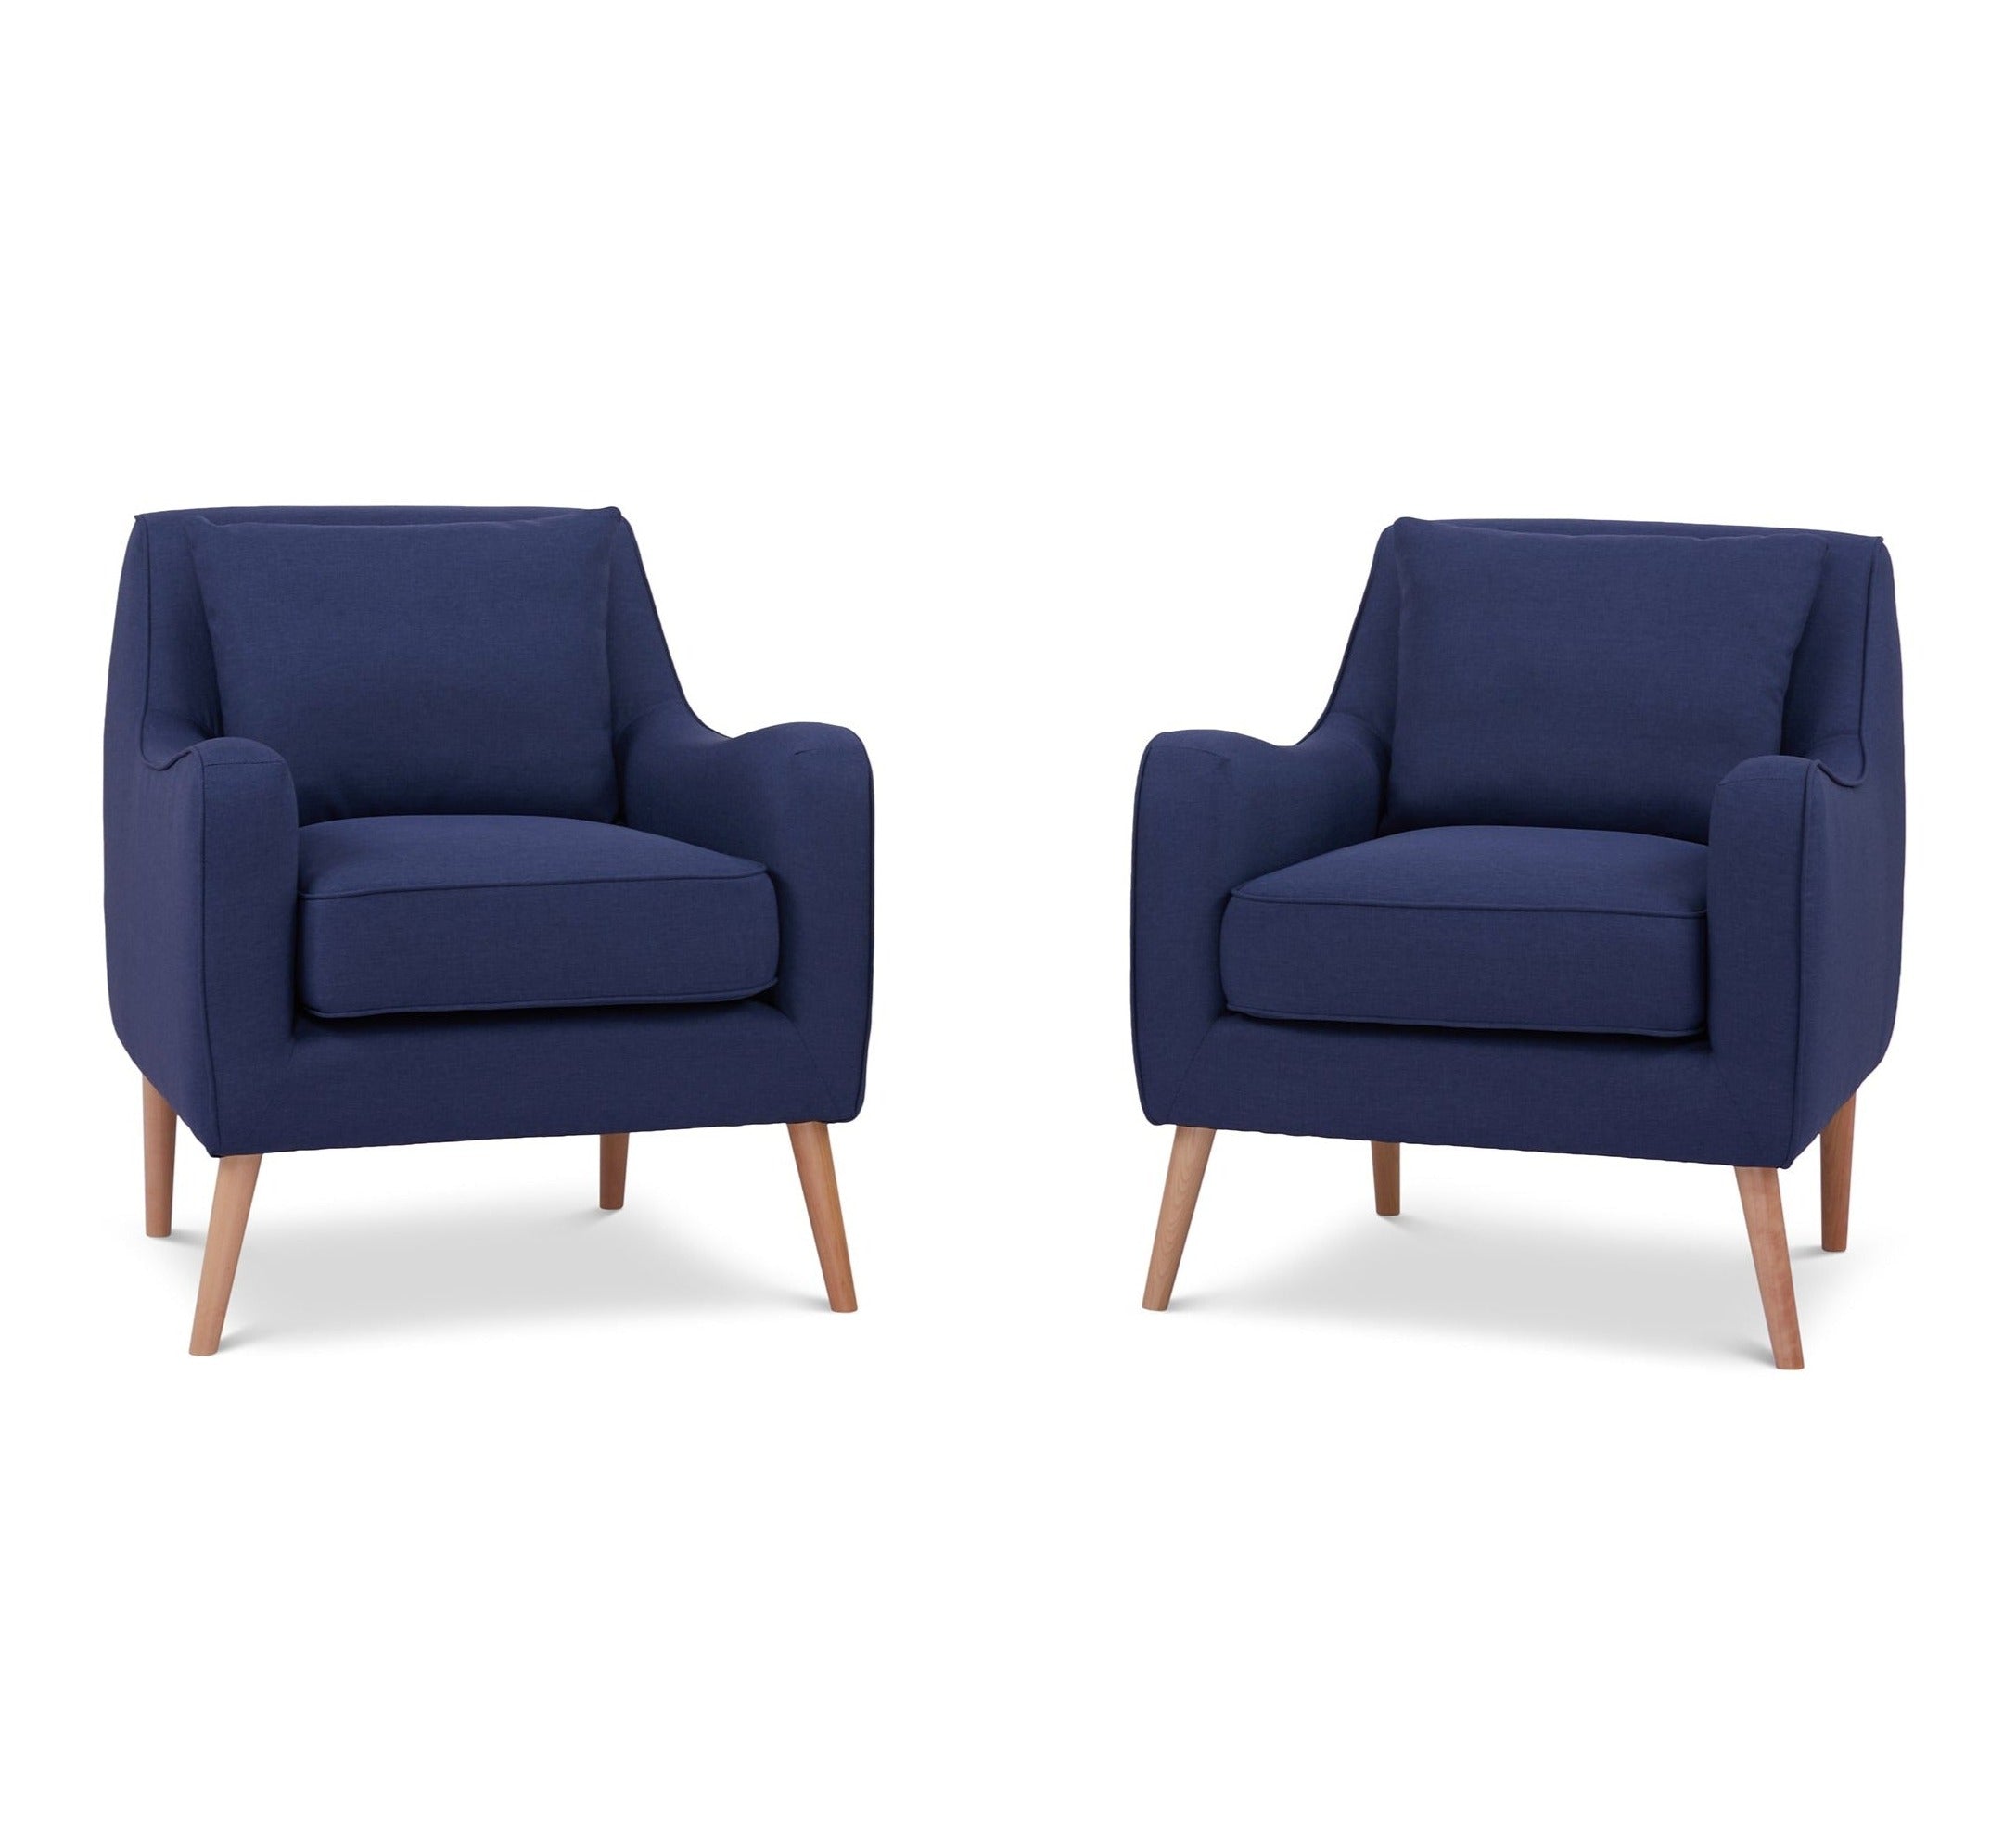 Set of 2 Lincoln Navy Accent Chairs